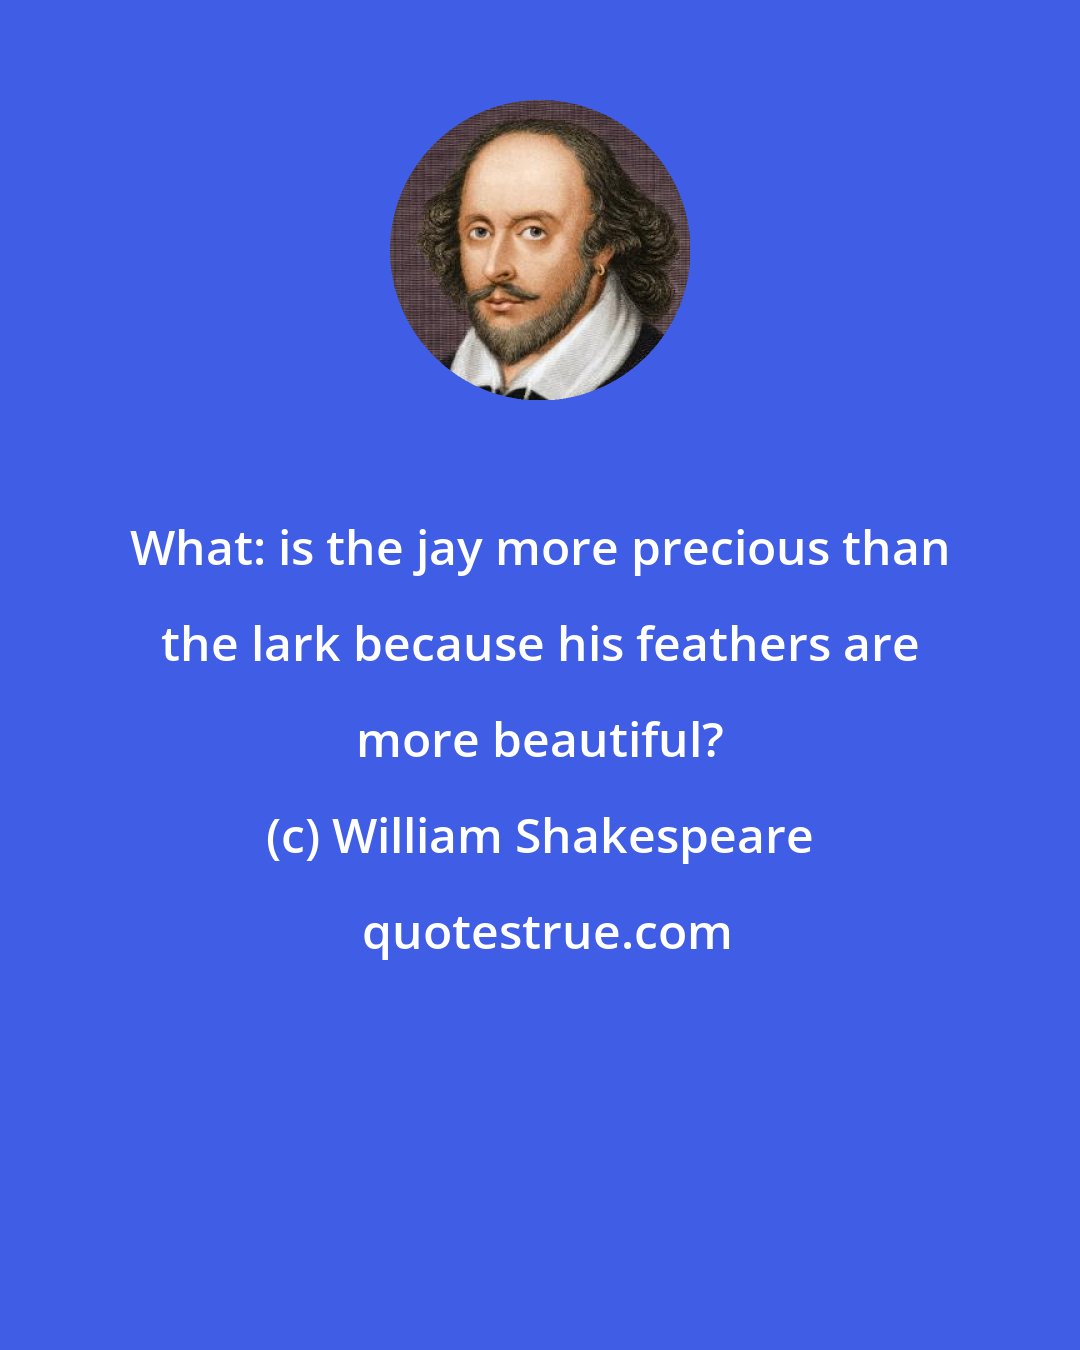 William Shakespeare: What: is the jay more precious than the lark because his feathers are more beautiful?